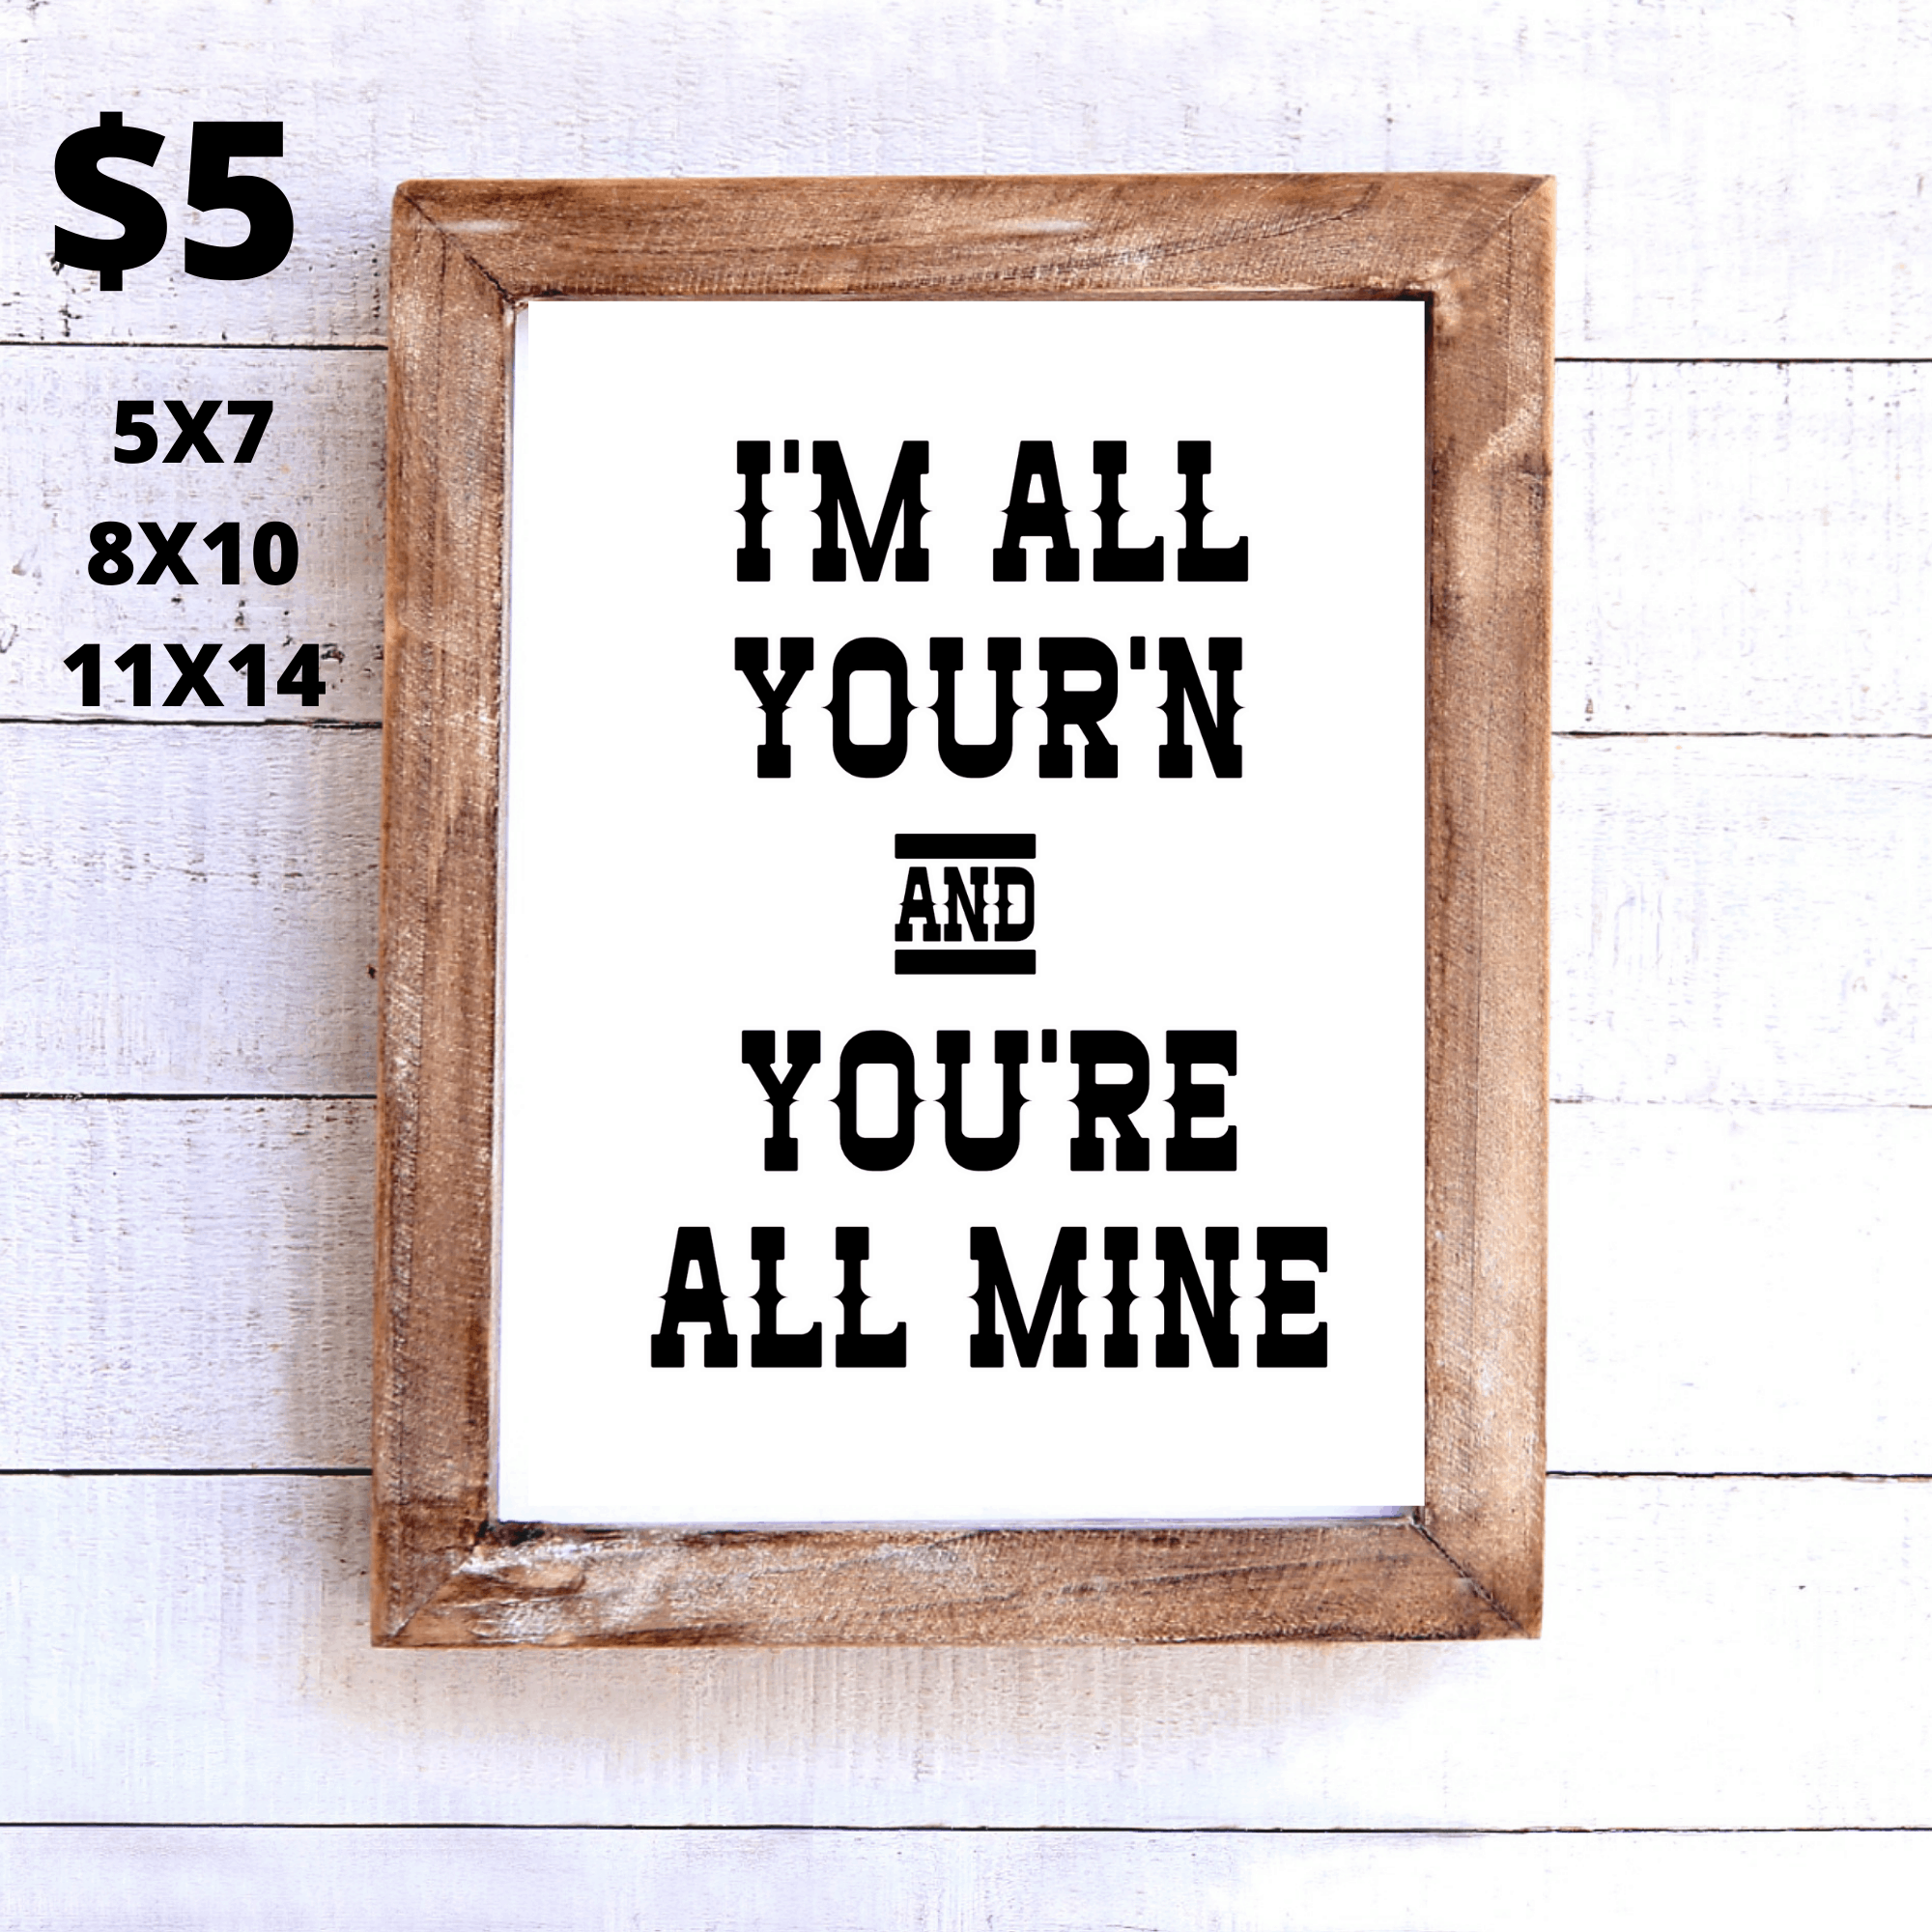 I'm-all-your'n-and-you're-all-mine